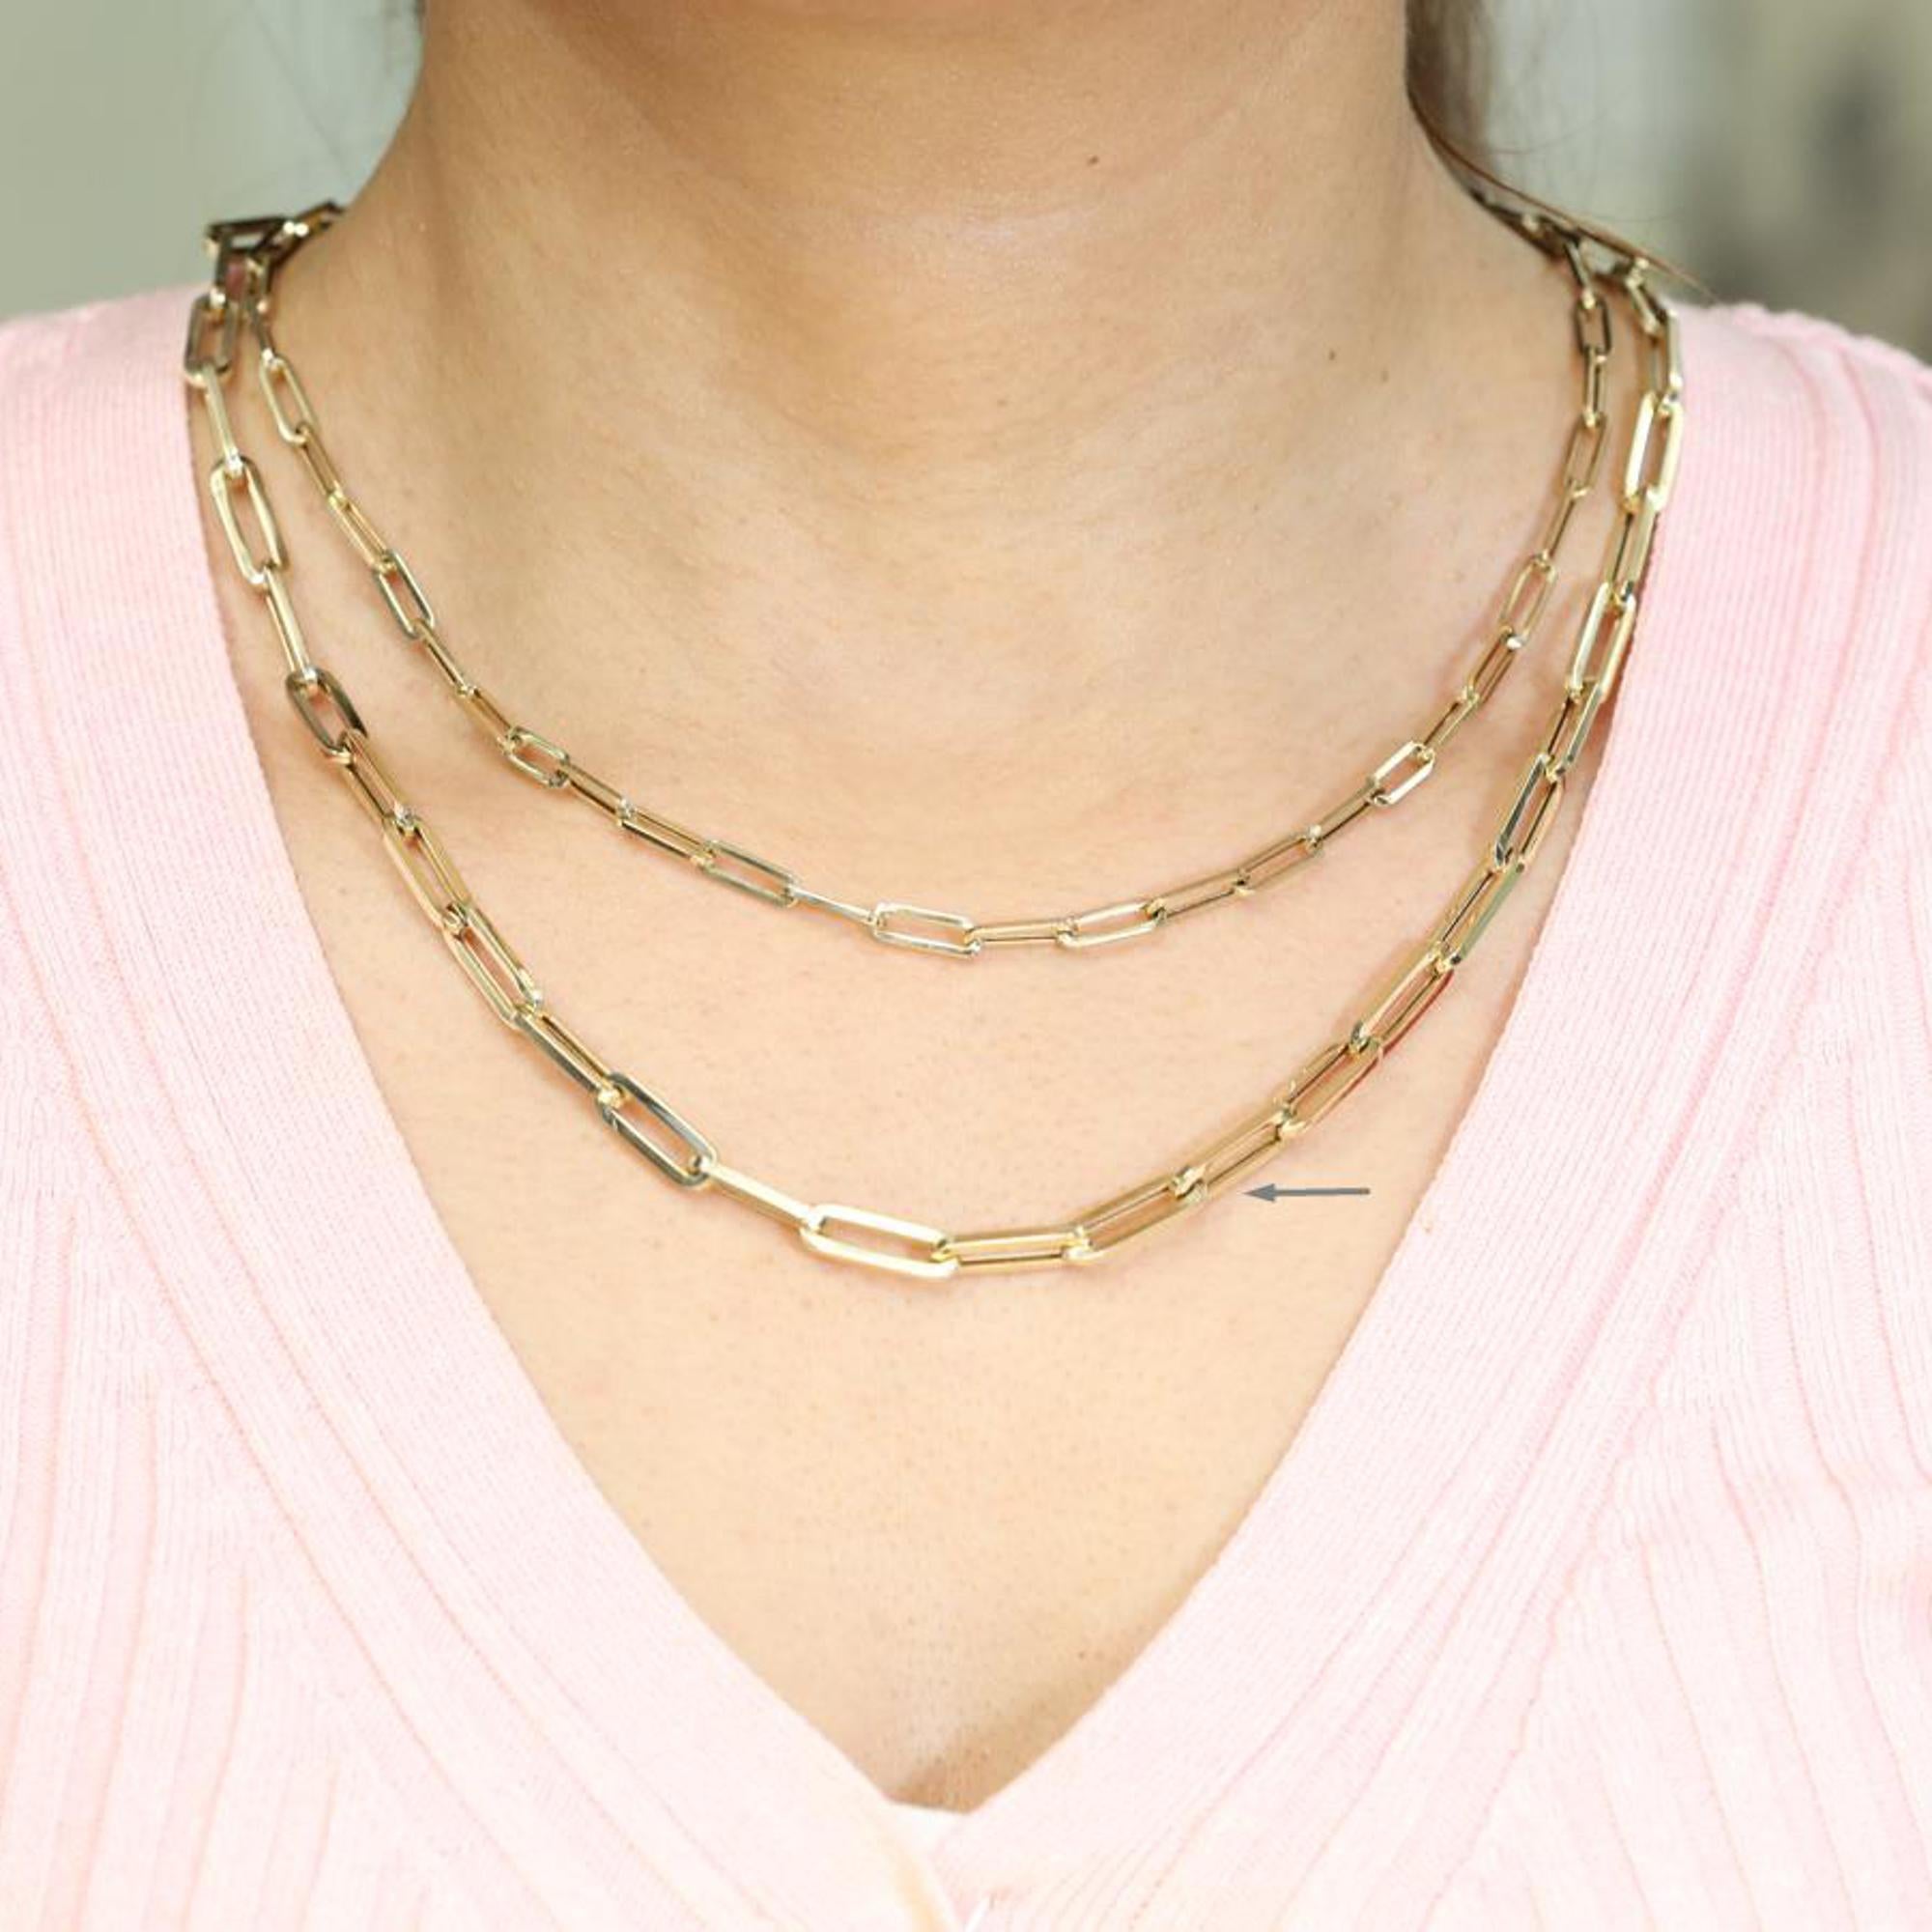 Trendy and lightweight for an everyday look. This paper clip link chain necklace is crafted in 14k yellow gold. Length: 18 inches. Link Size: 16mm x 5.3mm. Weight: 13.2 grams. Closure: Lobster lock. Whether you layer up or wear it solo, you are sure